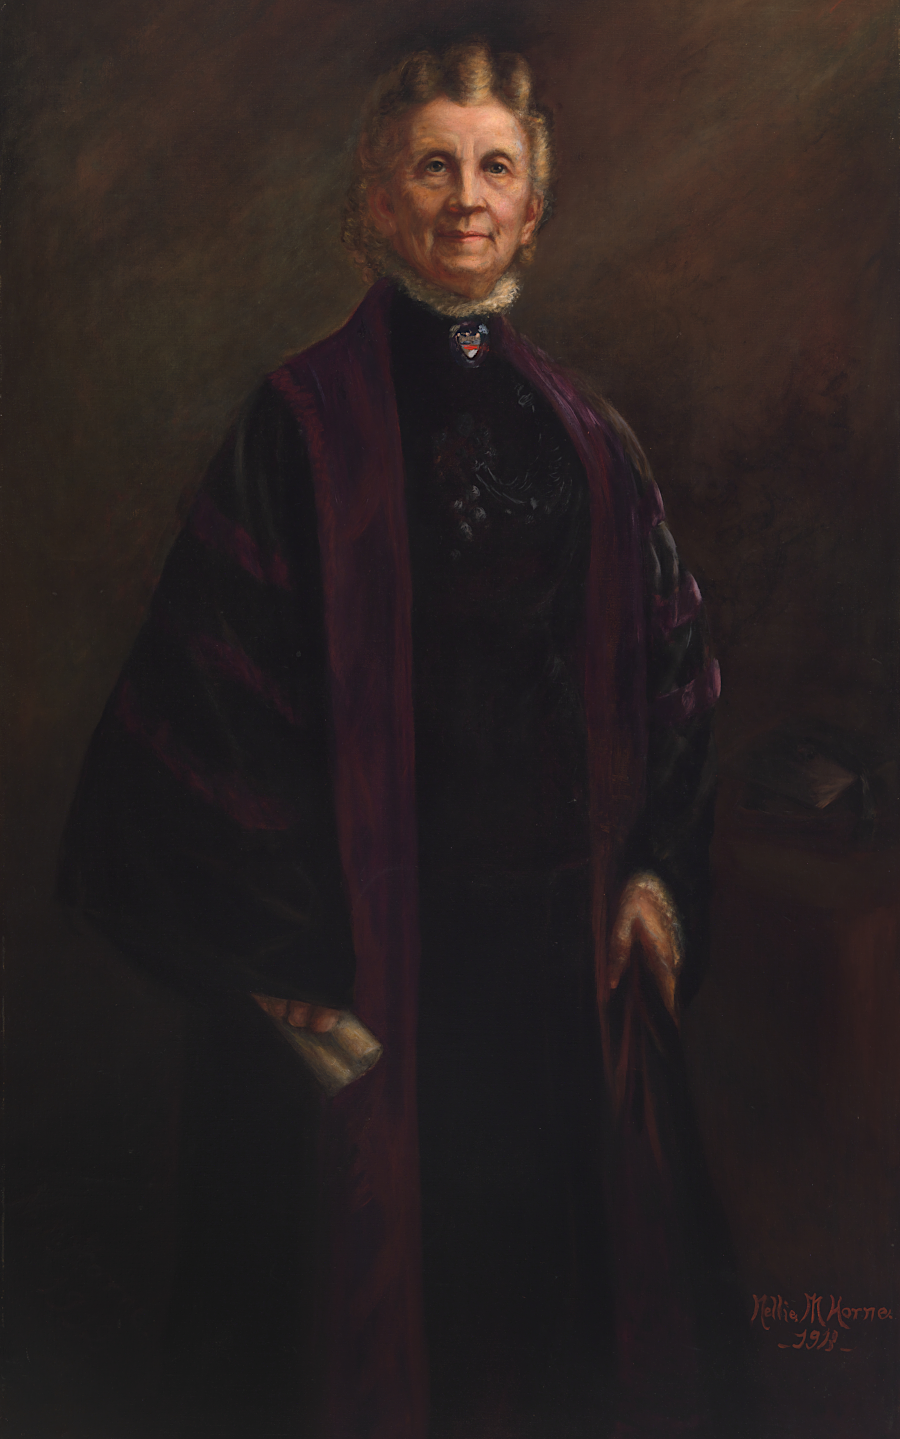 17 years after Belva Lockwood became the first woman to argue cases before the US Supreme Court, the Virginia Supreme Court of Appeals refused to admit her to the Virginia bar